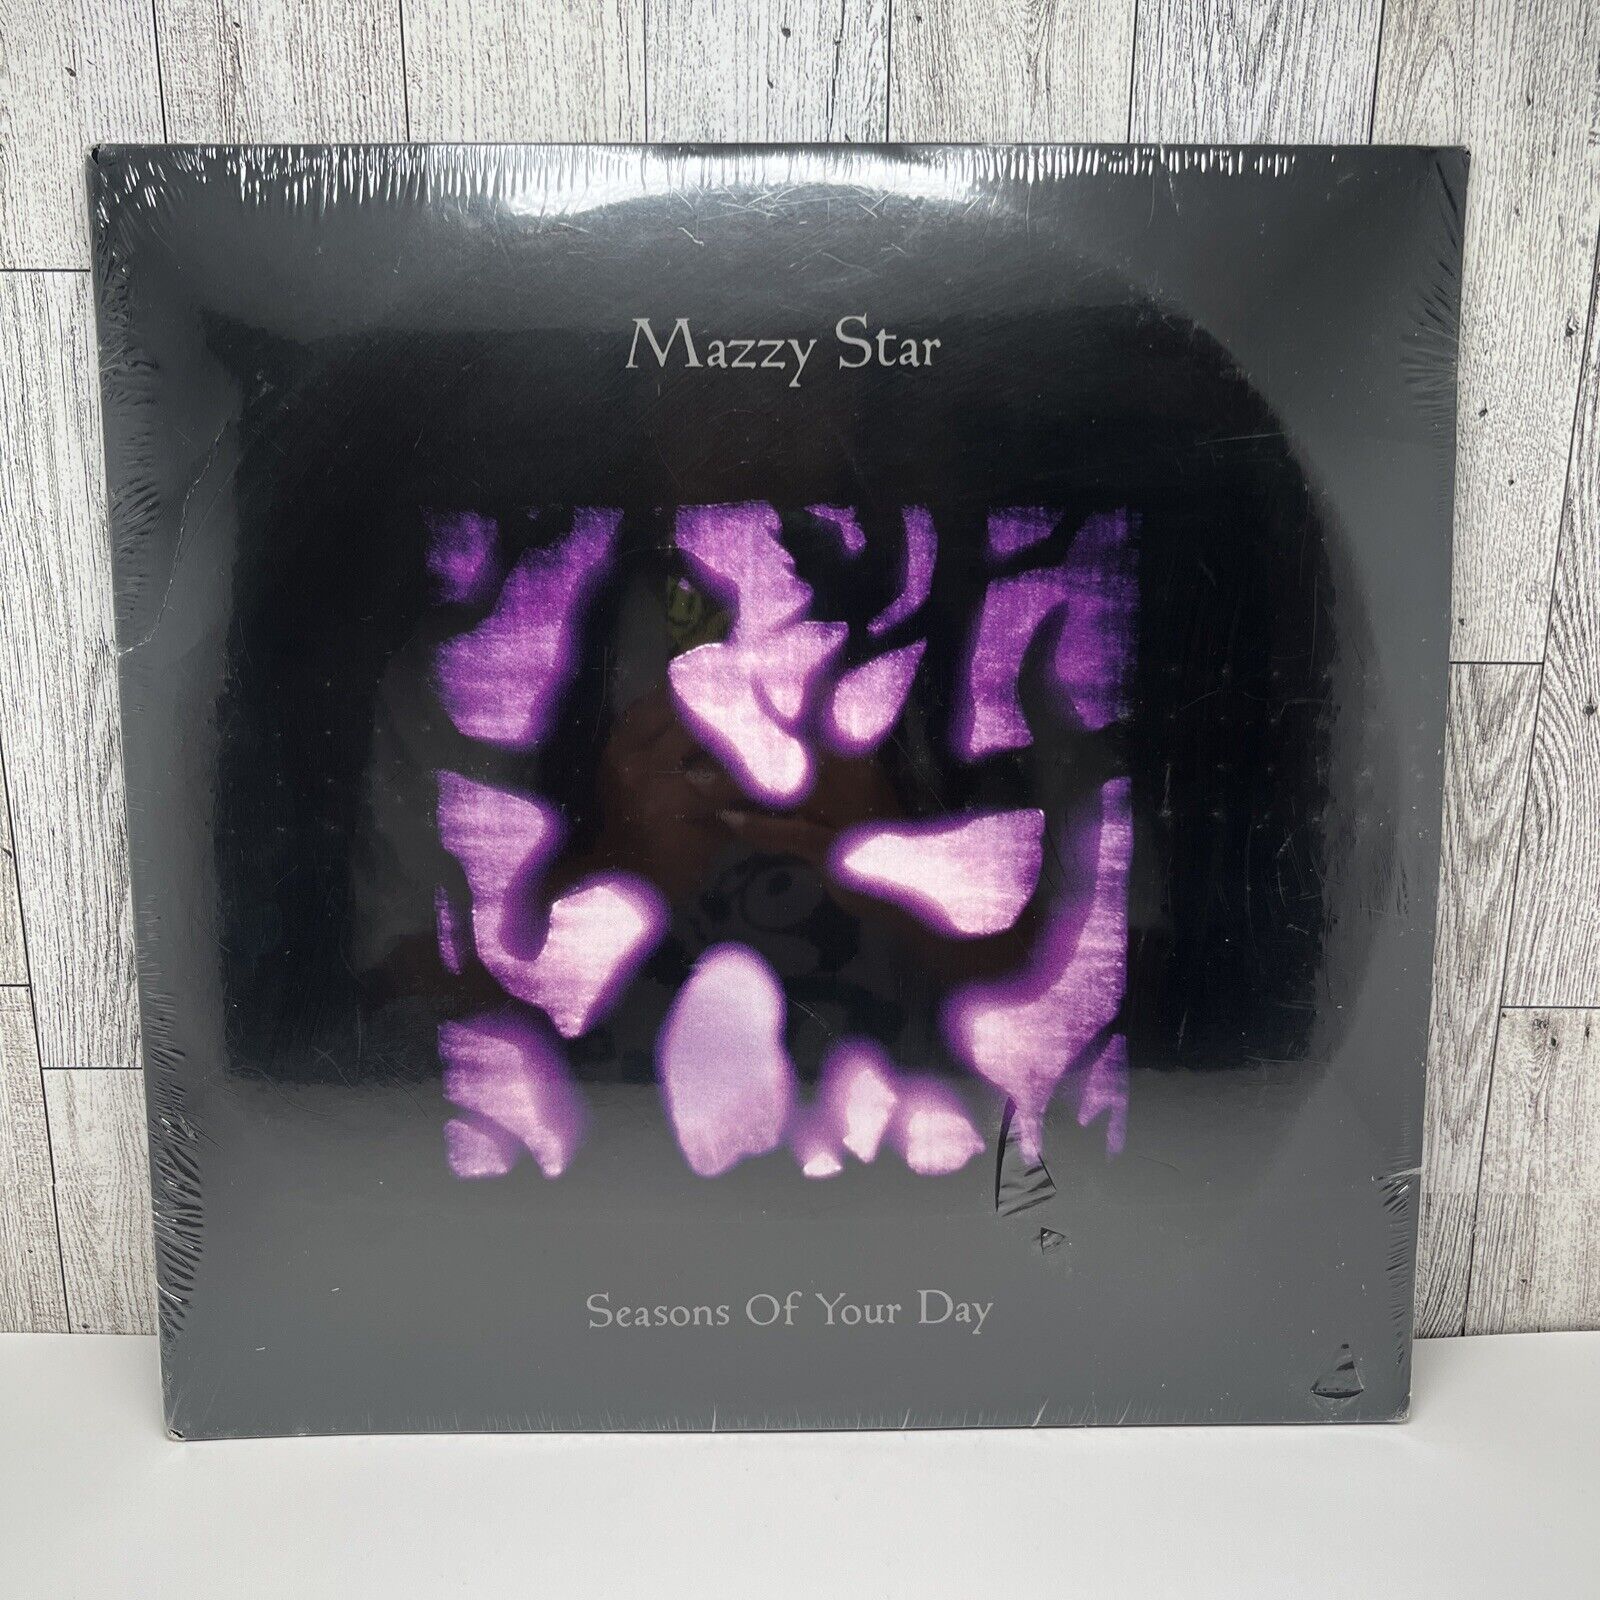 Seasons of Your Day by Mazzy Star Record, 2013 - New Sealed Sleeve Damage